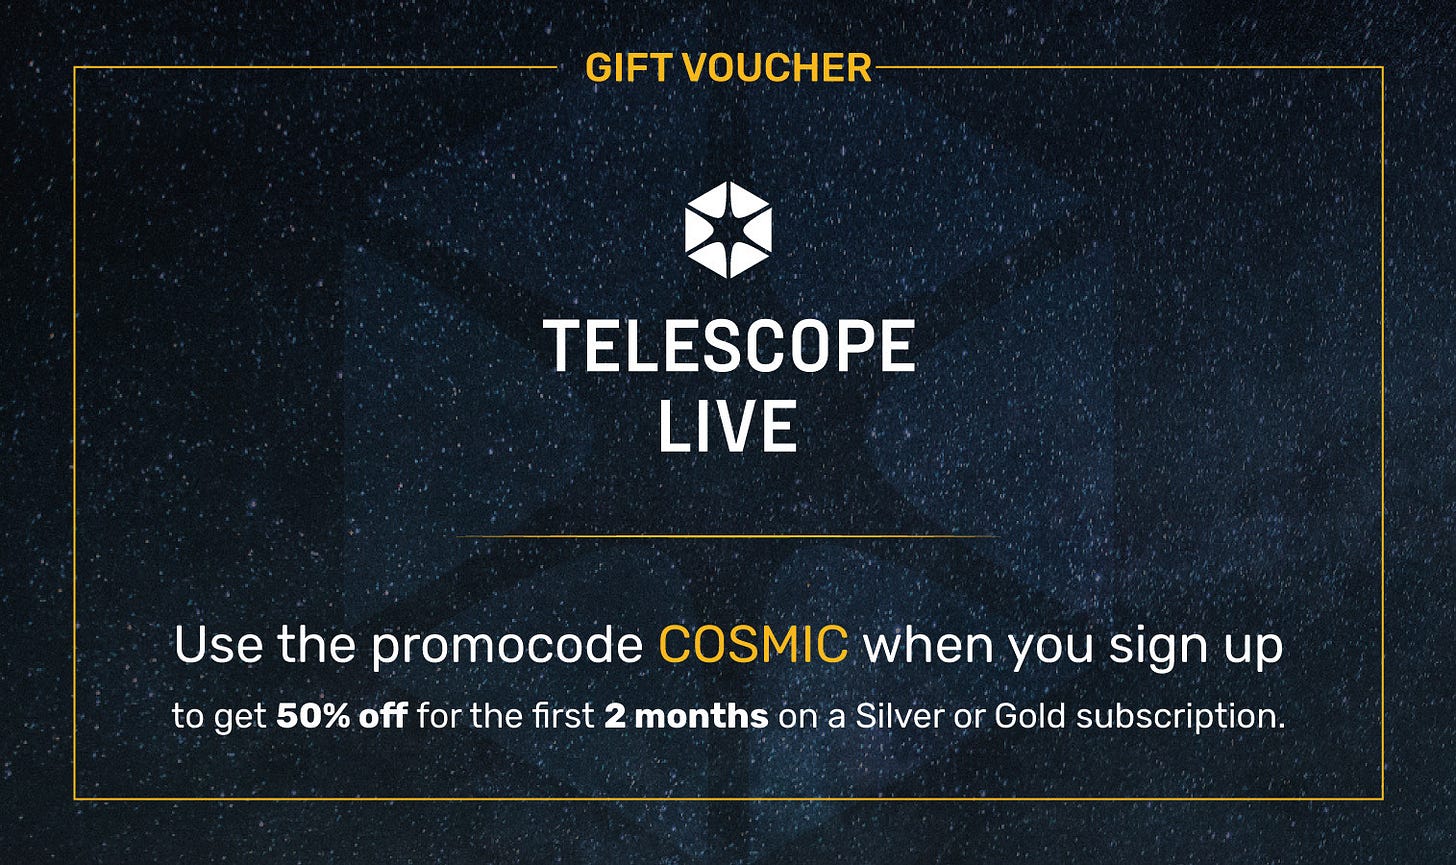 Use promo code COSMIC to get 50% off silver and gold subscriptions to Telescope Live for two months!